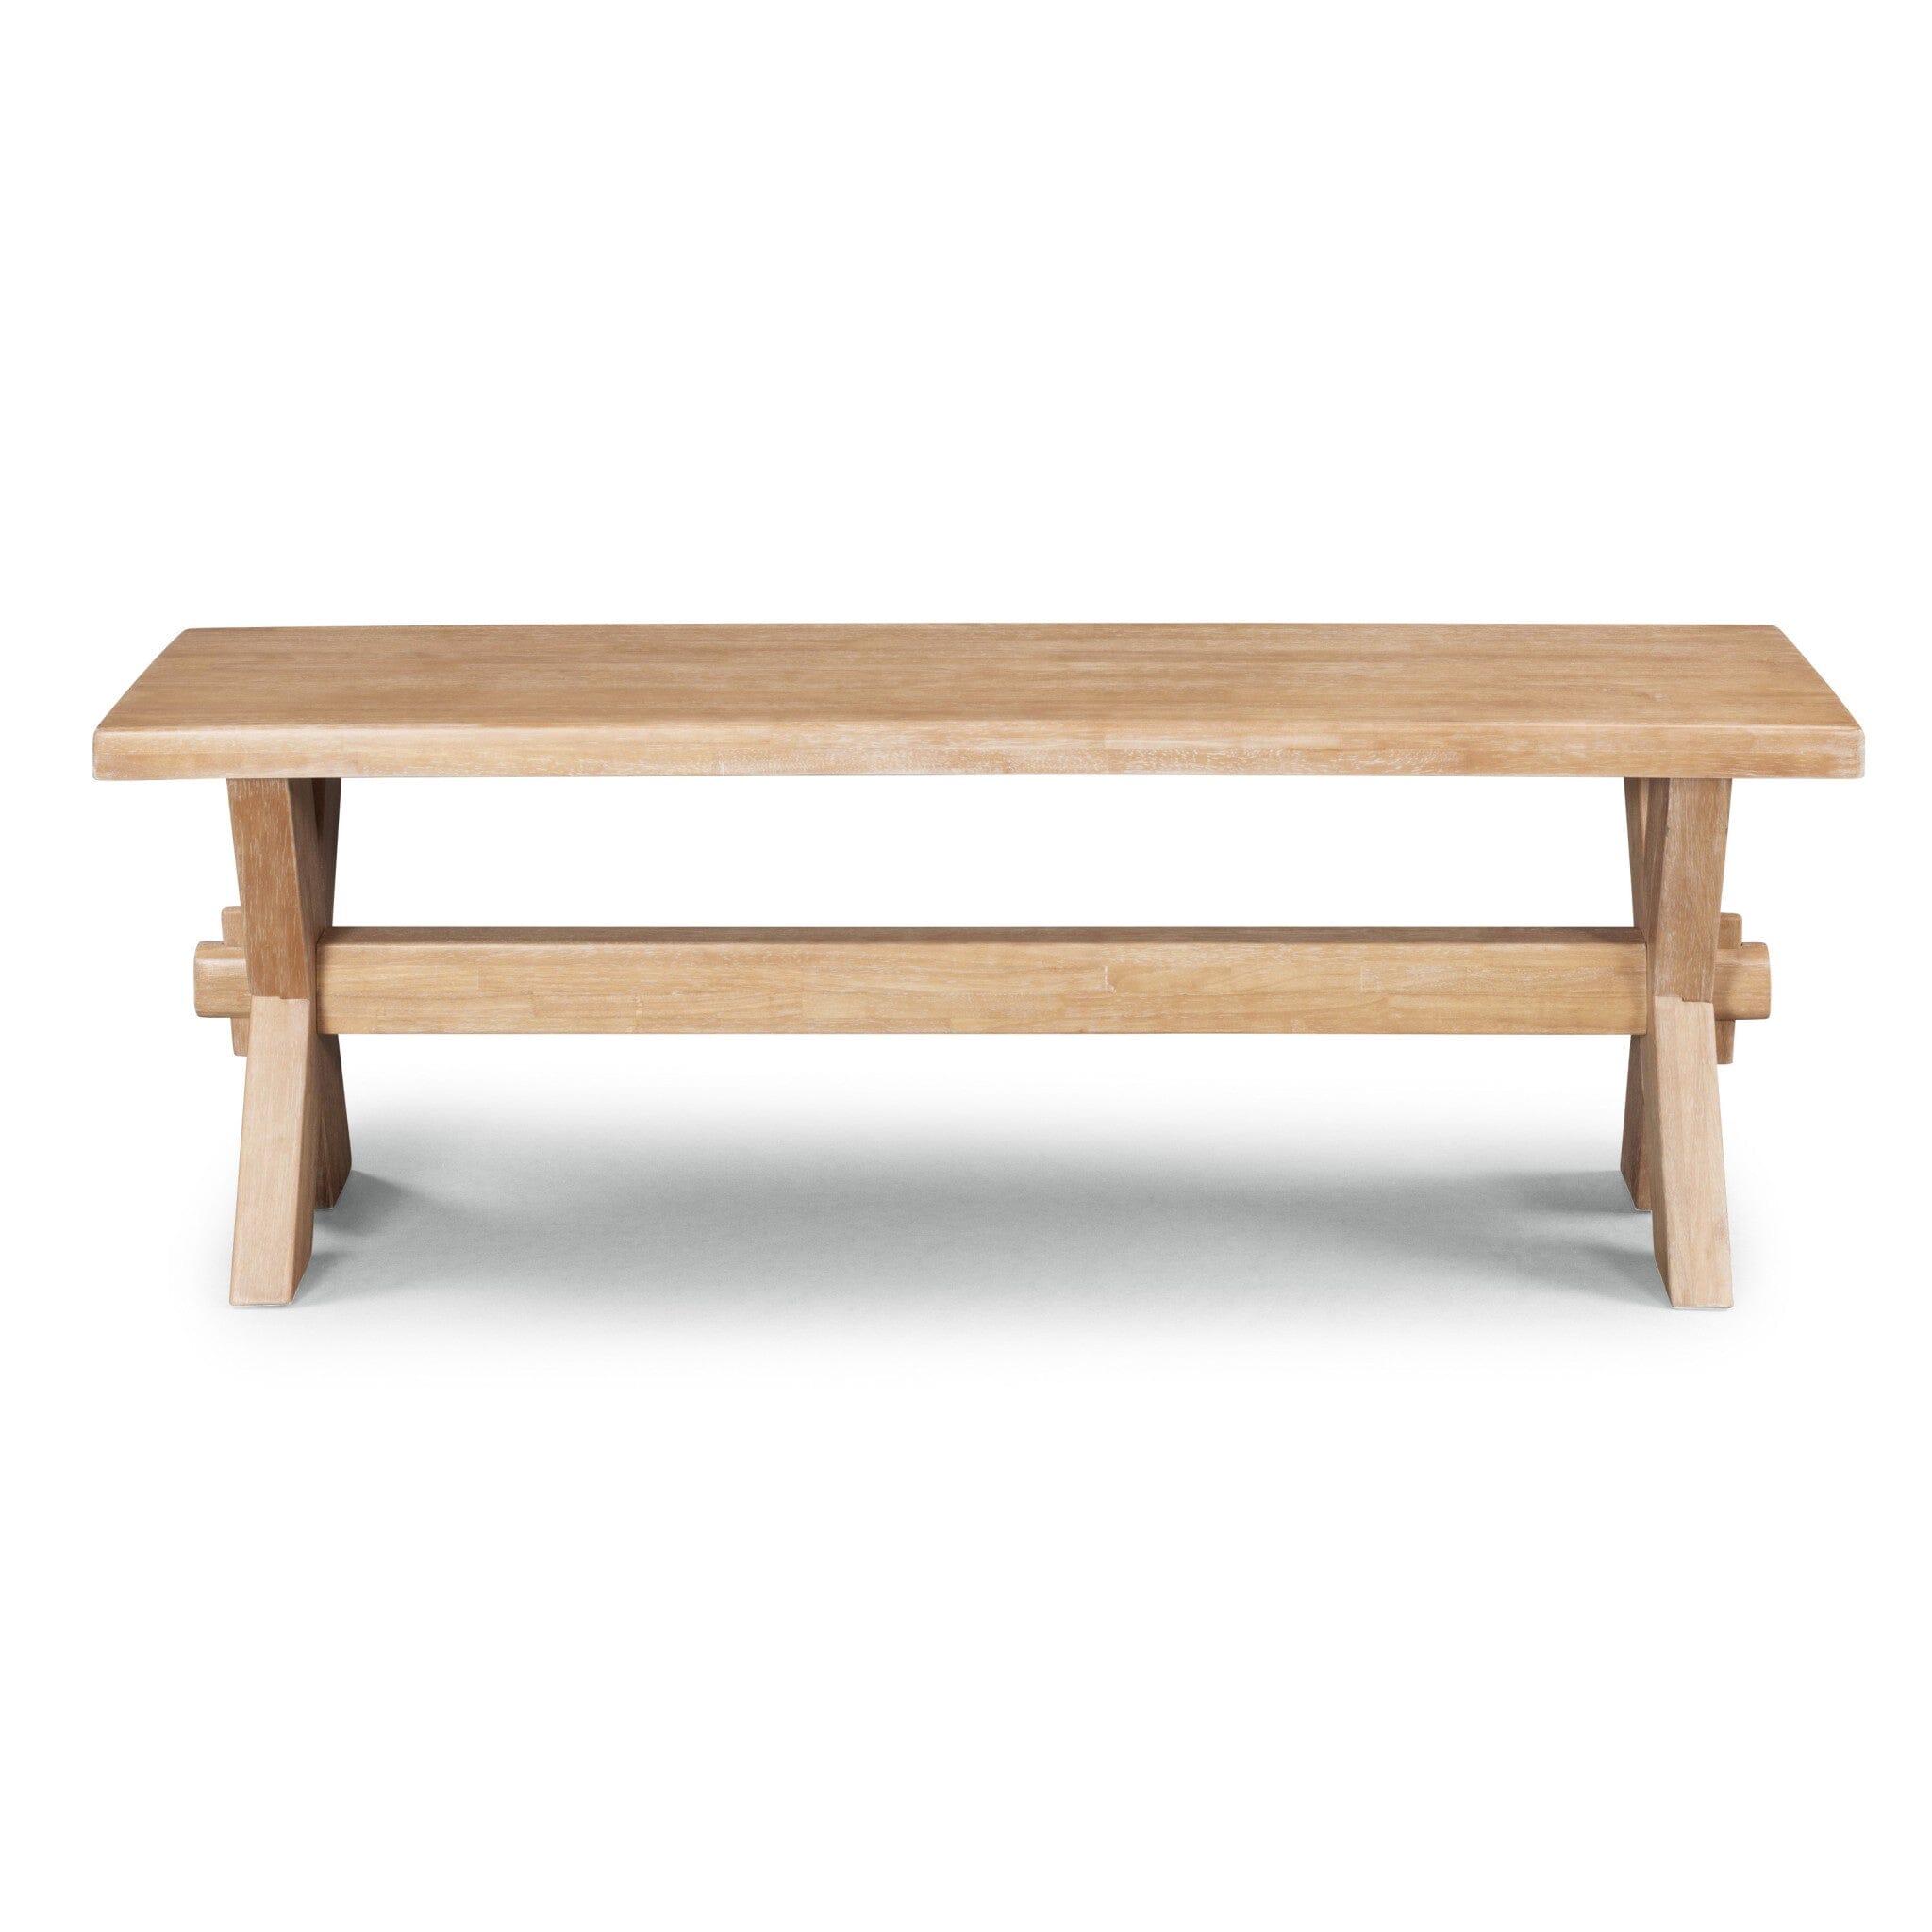 Traditional Dining Bench By Cambridge Dining Bench Cambridge